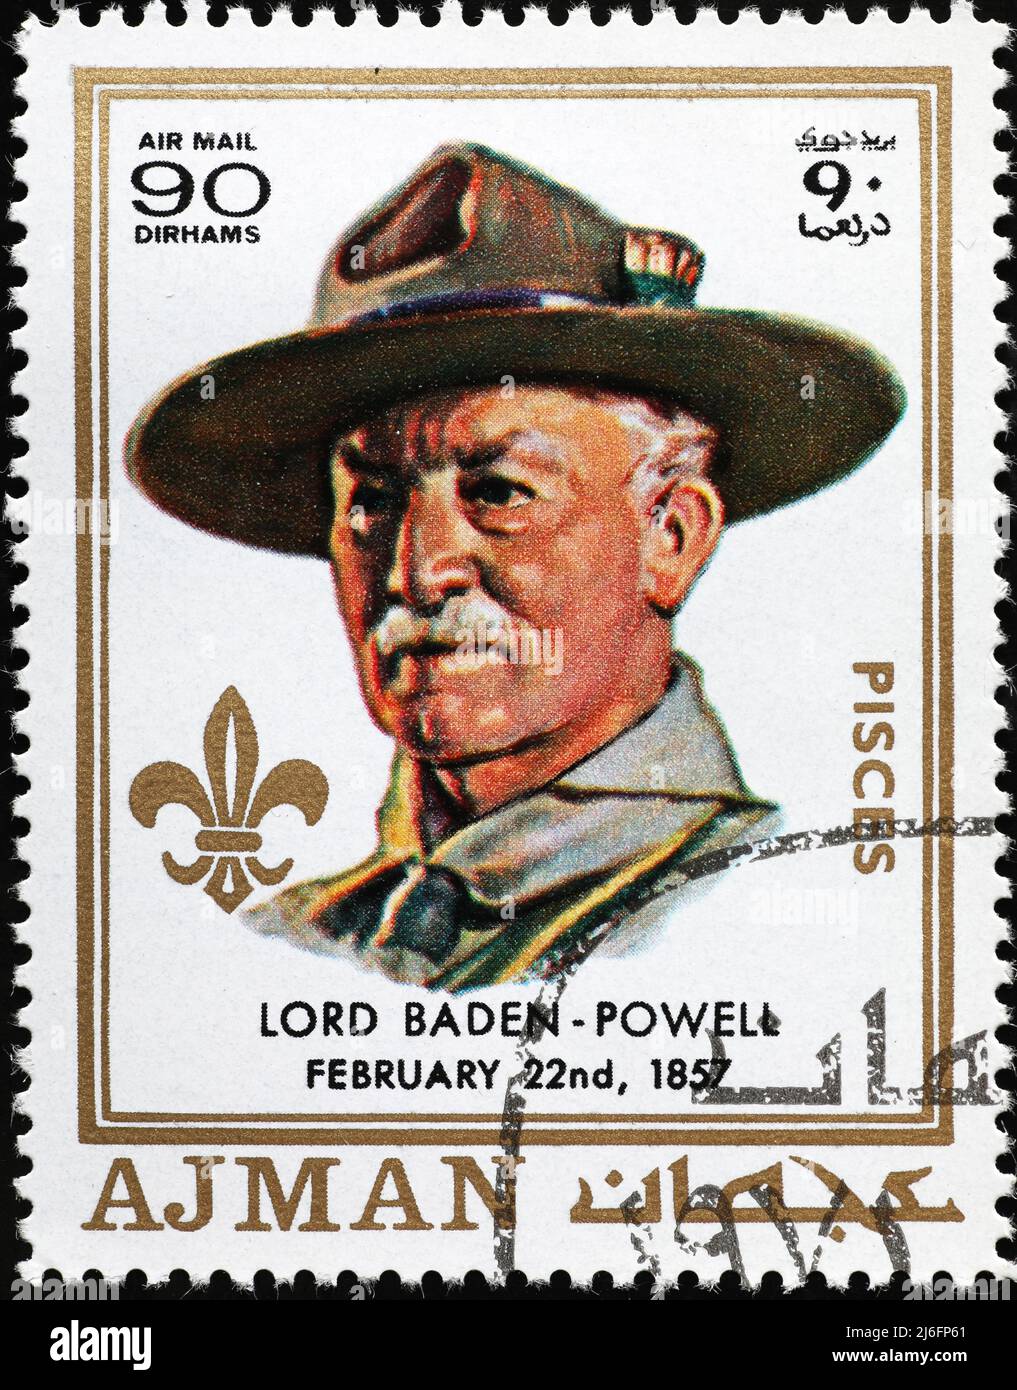 Lord Baden -Powell potrait on postage stamp Stock Photo